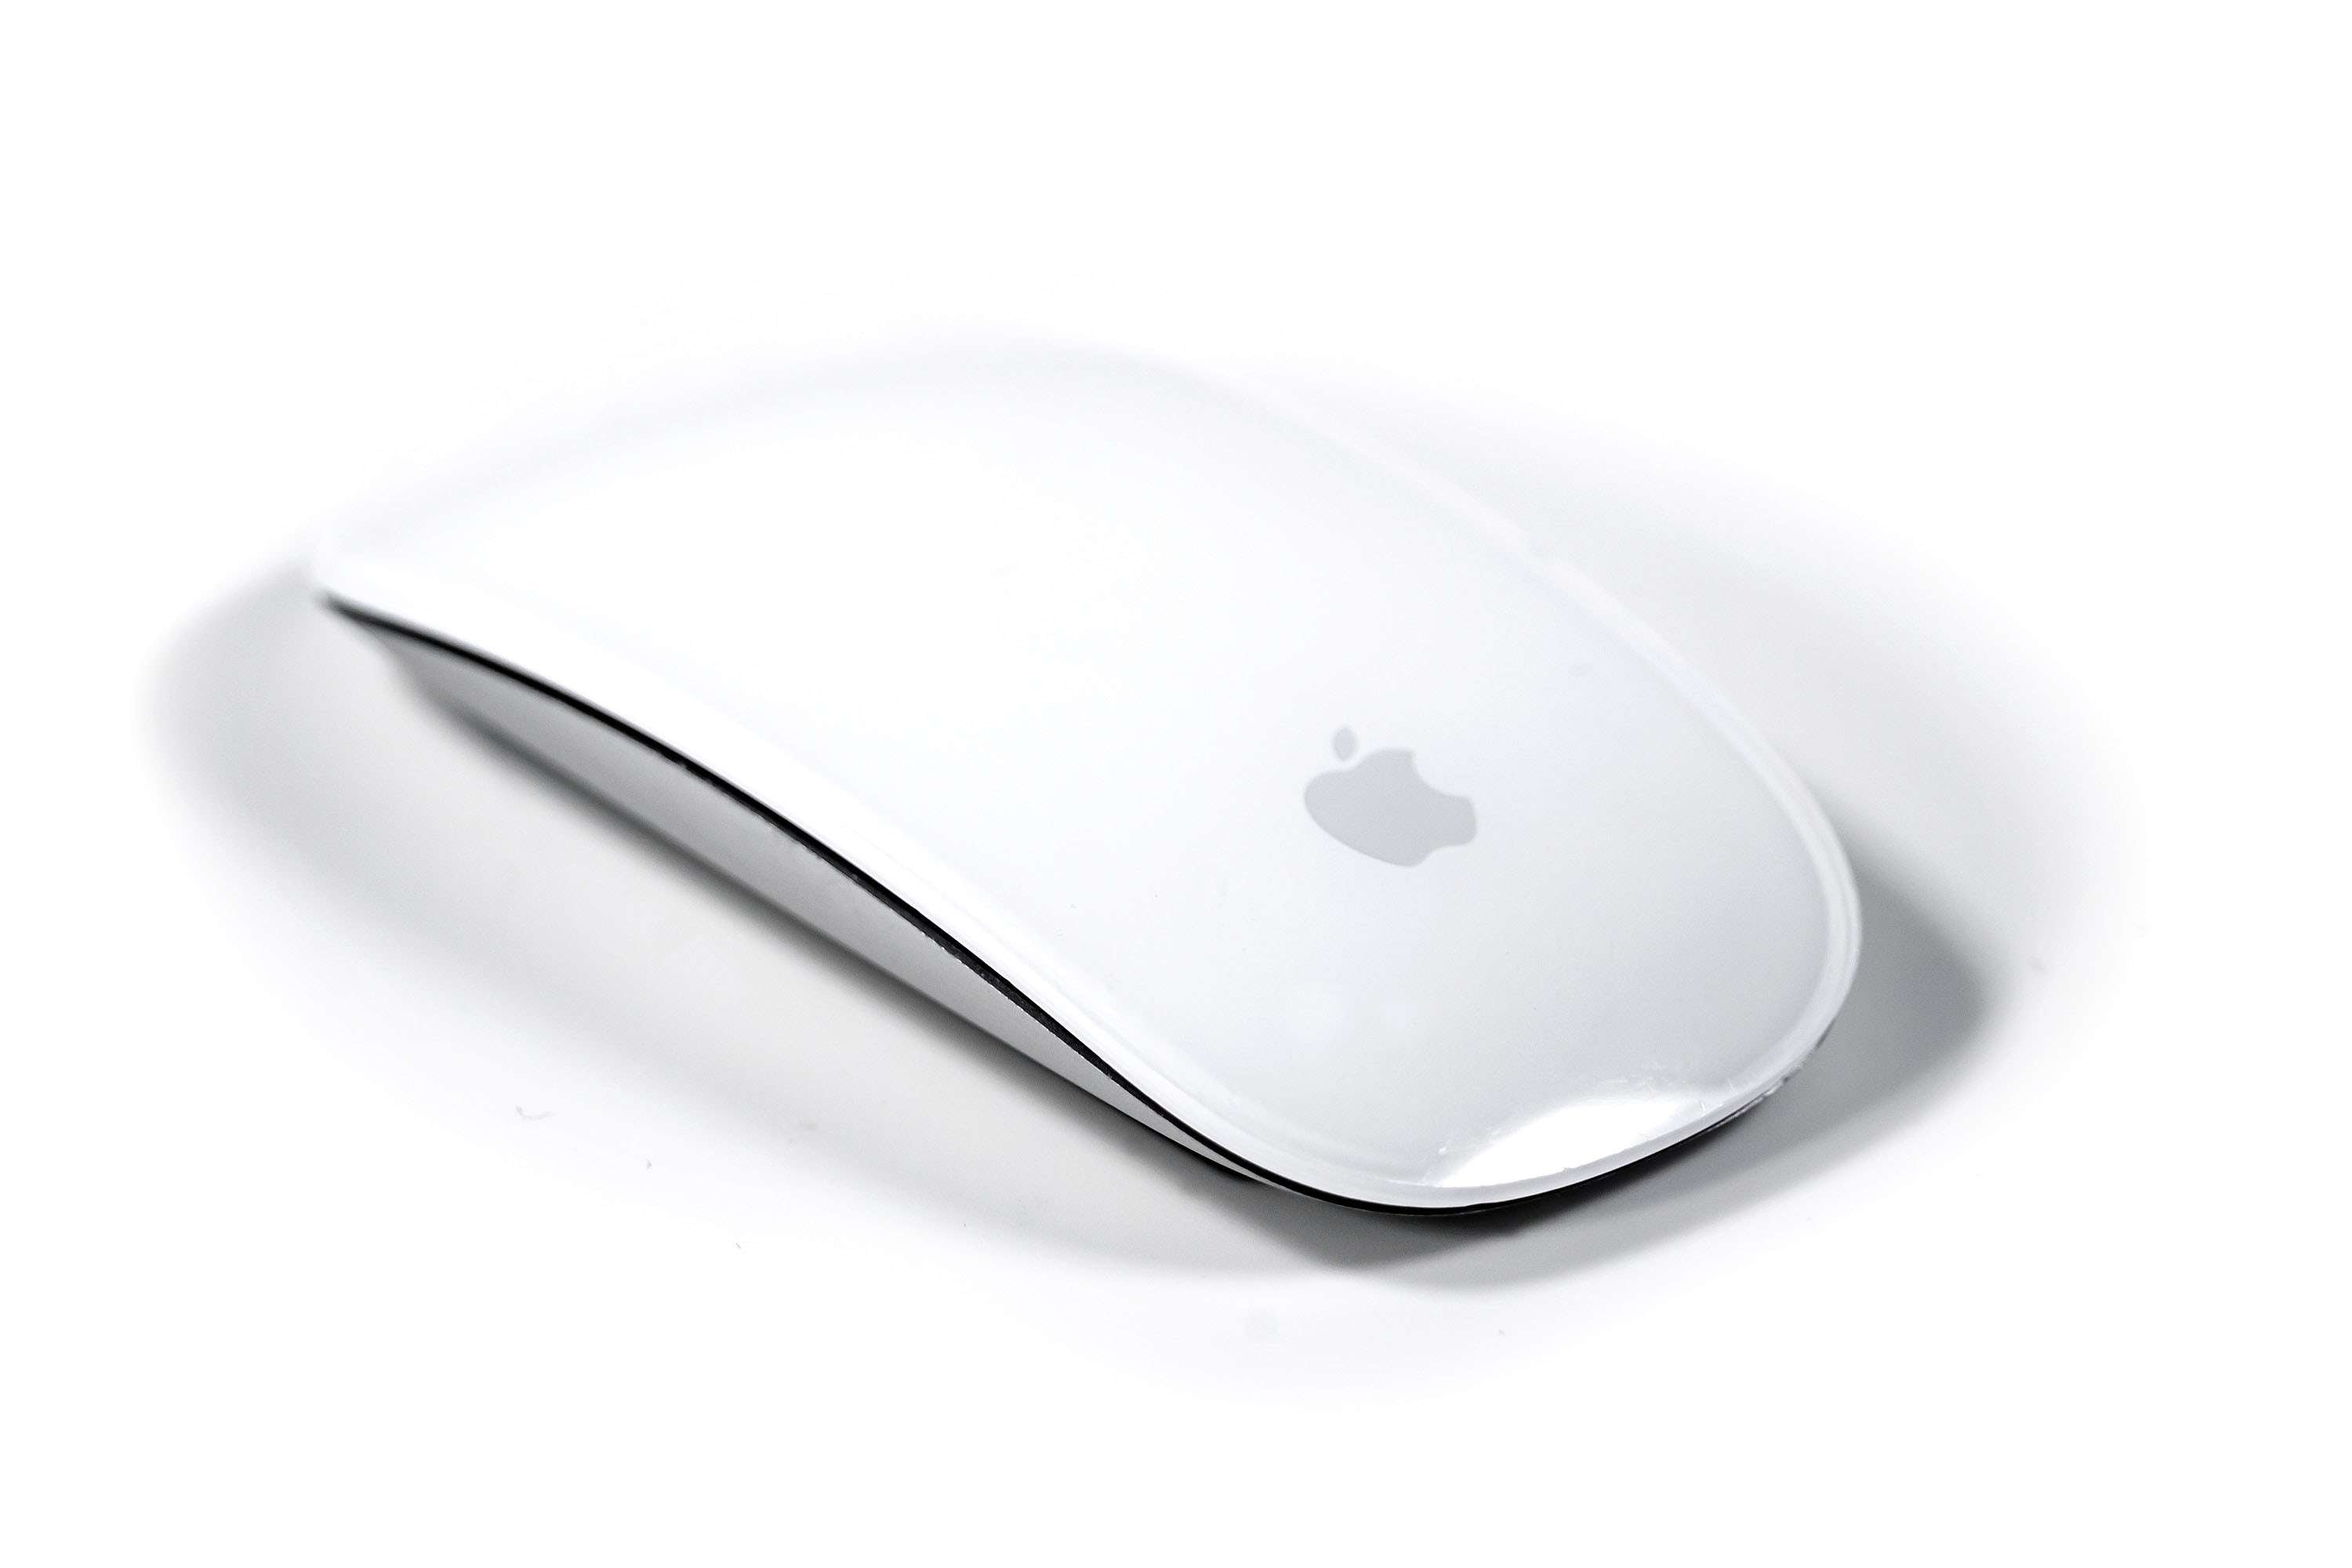 Buy Used & Refurbished Apple Magic Mouse Bluetooth Wireless A1296